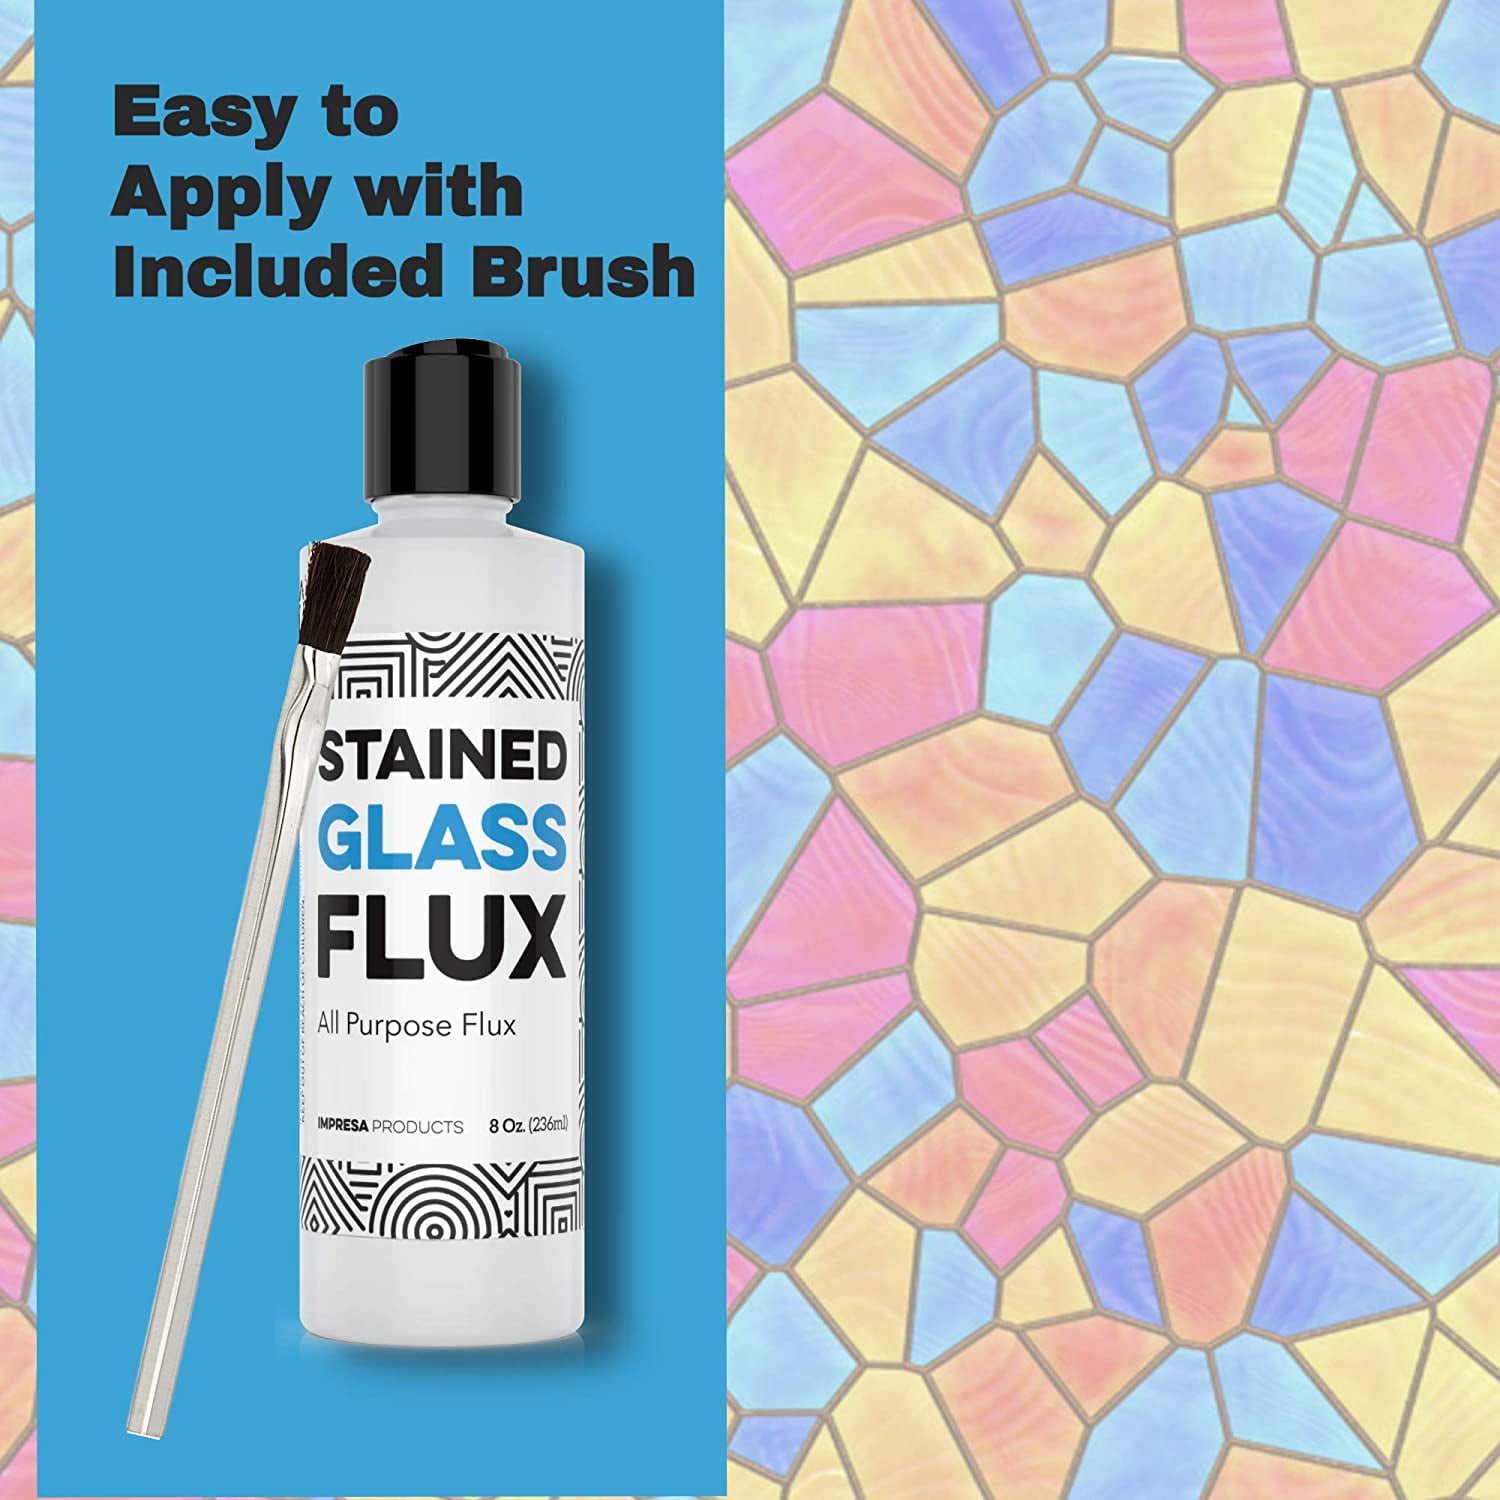 Impresa Products - 8oz Liquid Zinc Flux for Stained Glass, Soldering Work,  Glass Repair and more - Easy Clean Up - Made in USA 